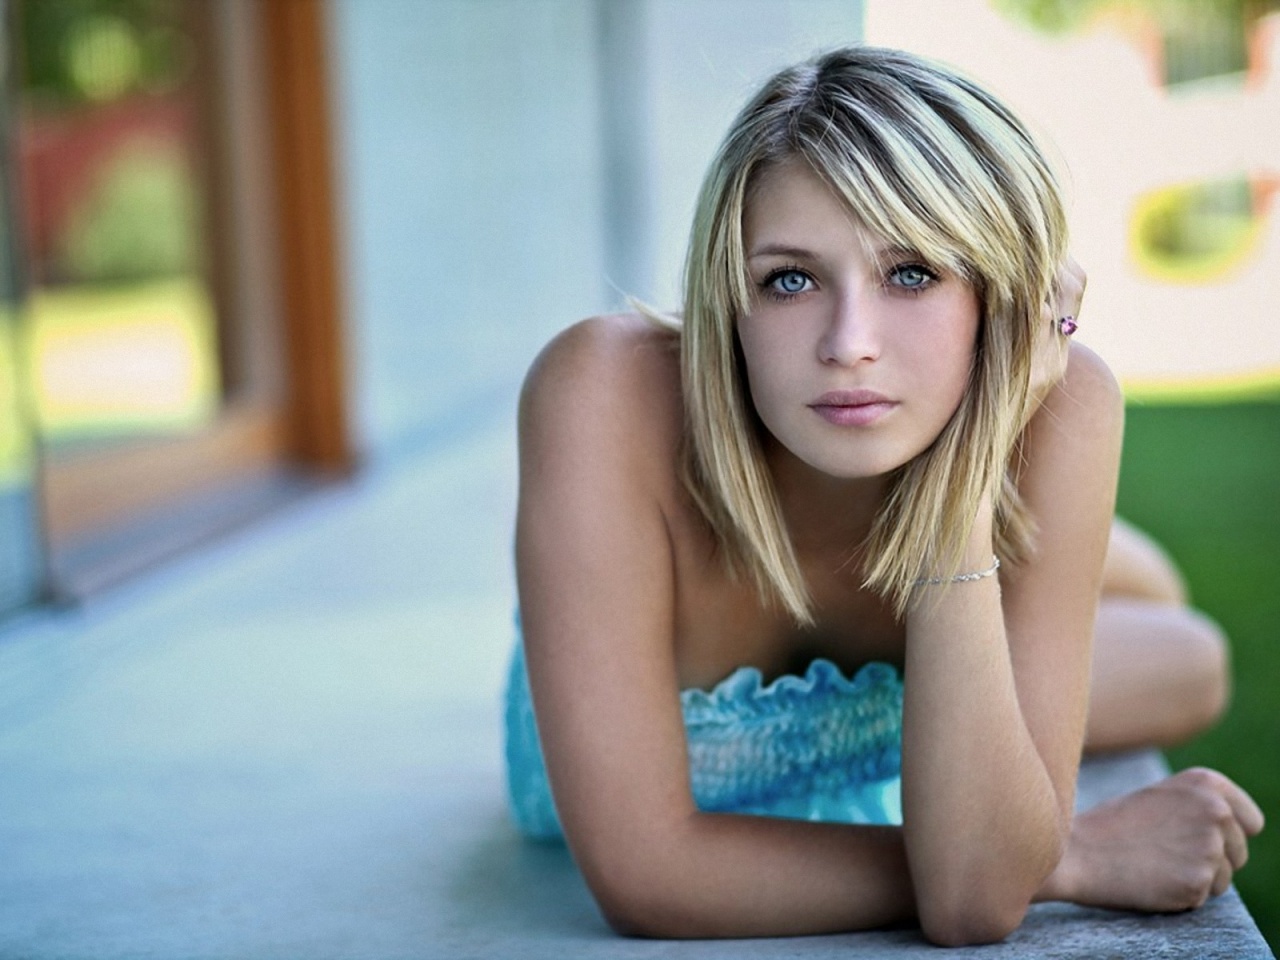 Free Download Gorgeous Blonde Wallpapers 33339 1280x960 [1280x960] For Your Desktop Mobile